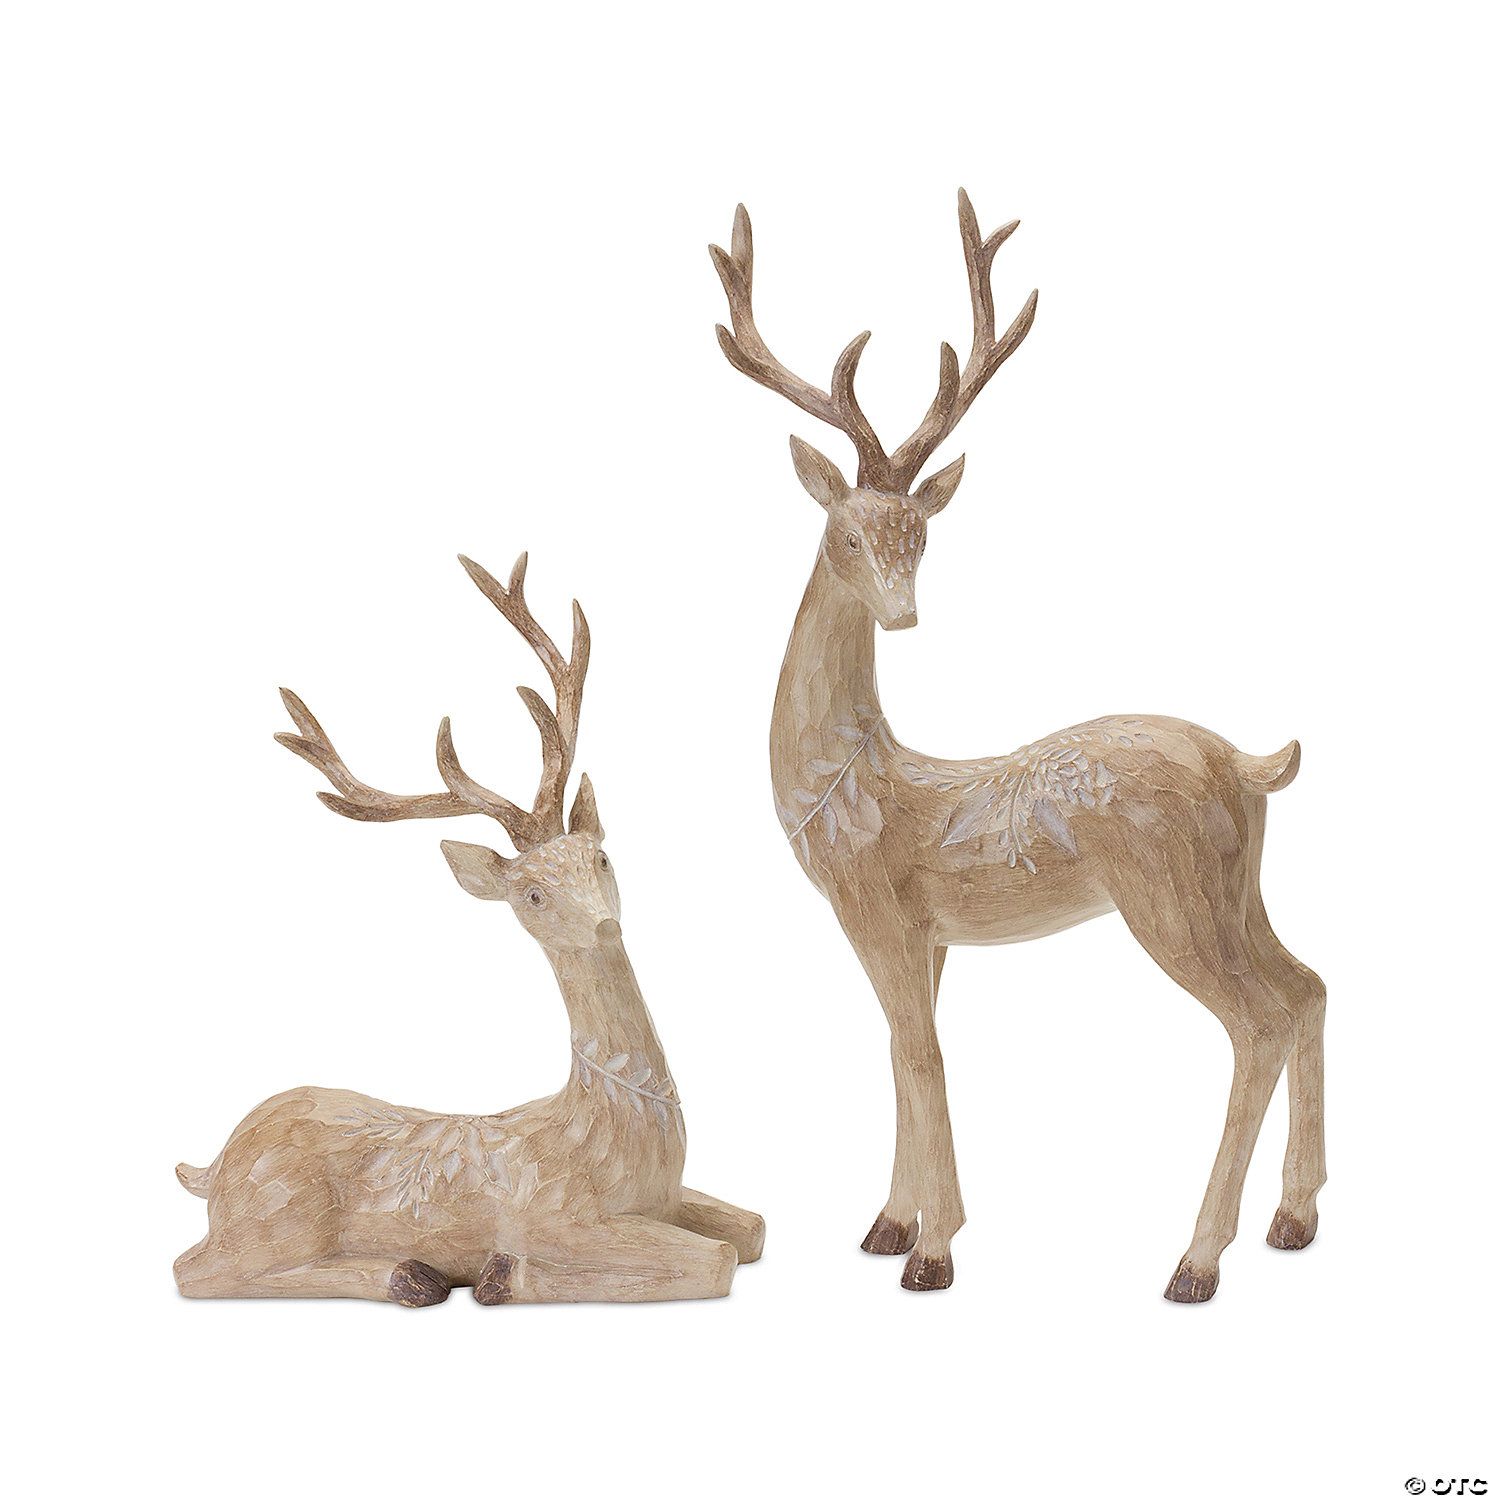 Carved Deer Figurine (Set Of 2) 8.75"L X 10.5"H, 8.5"L X 15.75"H Resin | Oriental Trading Company